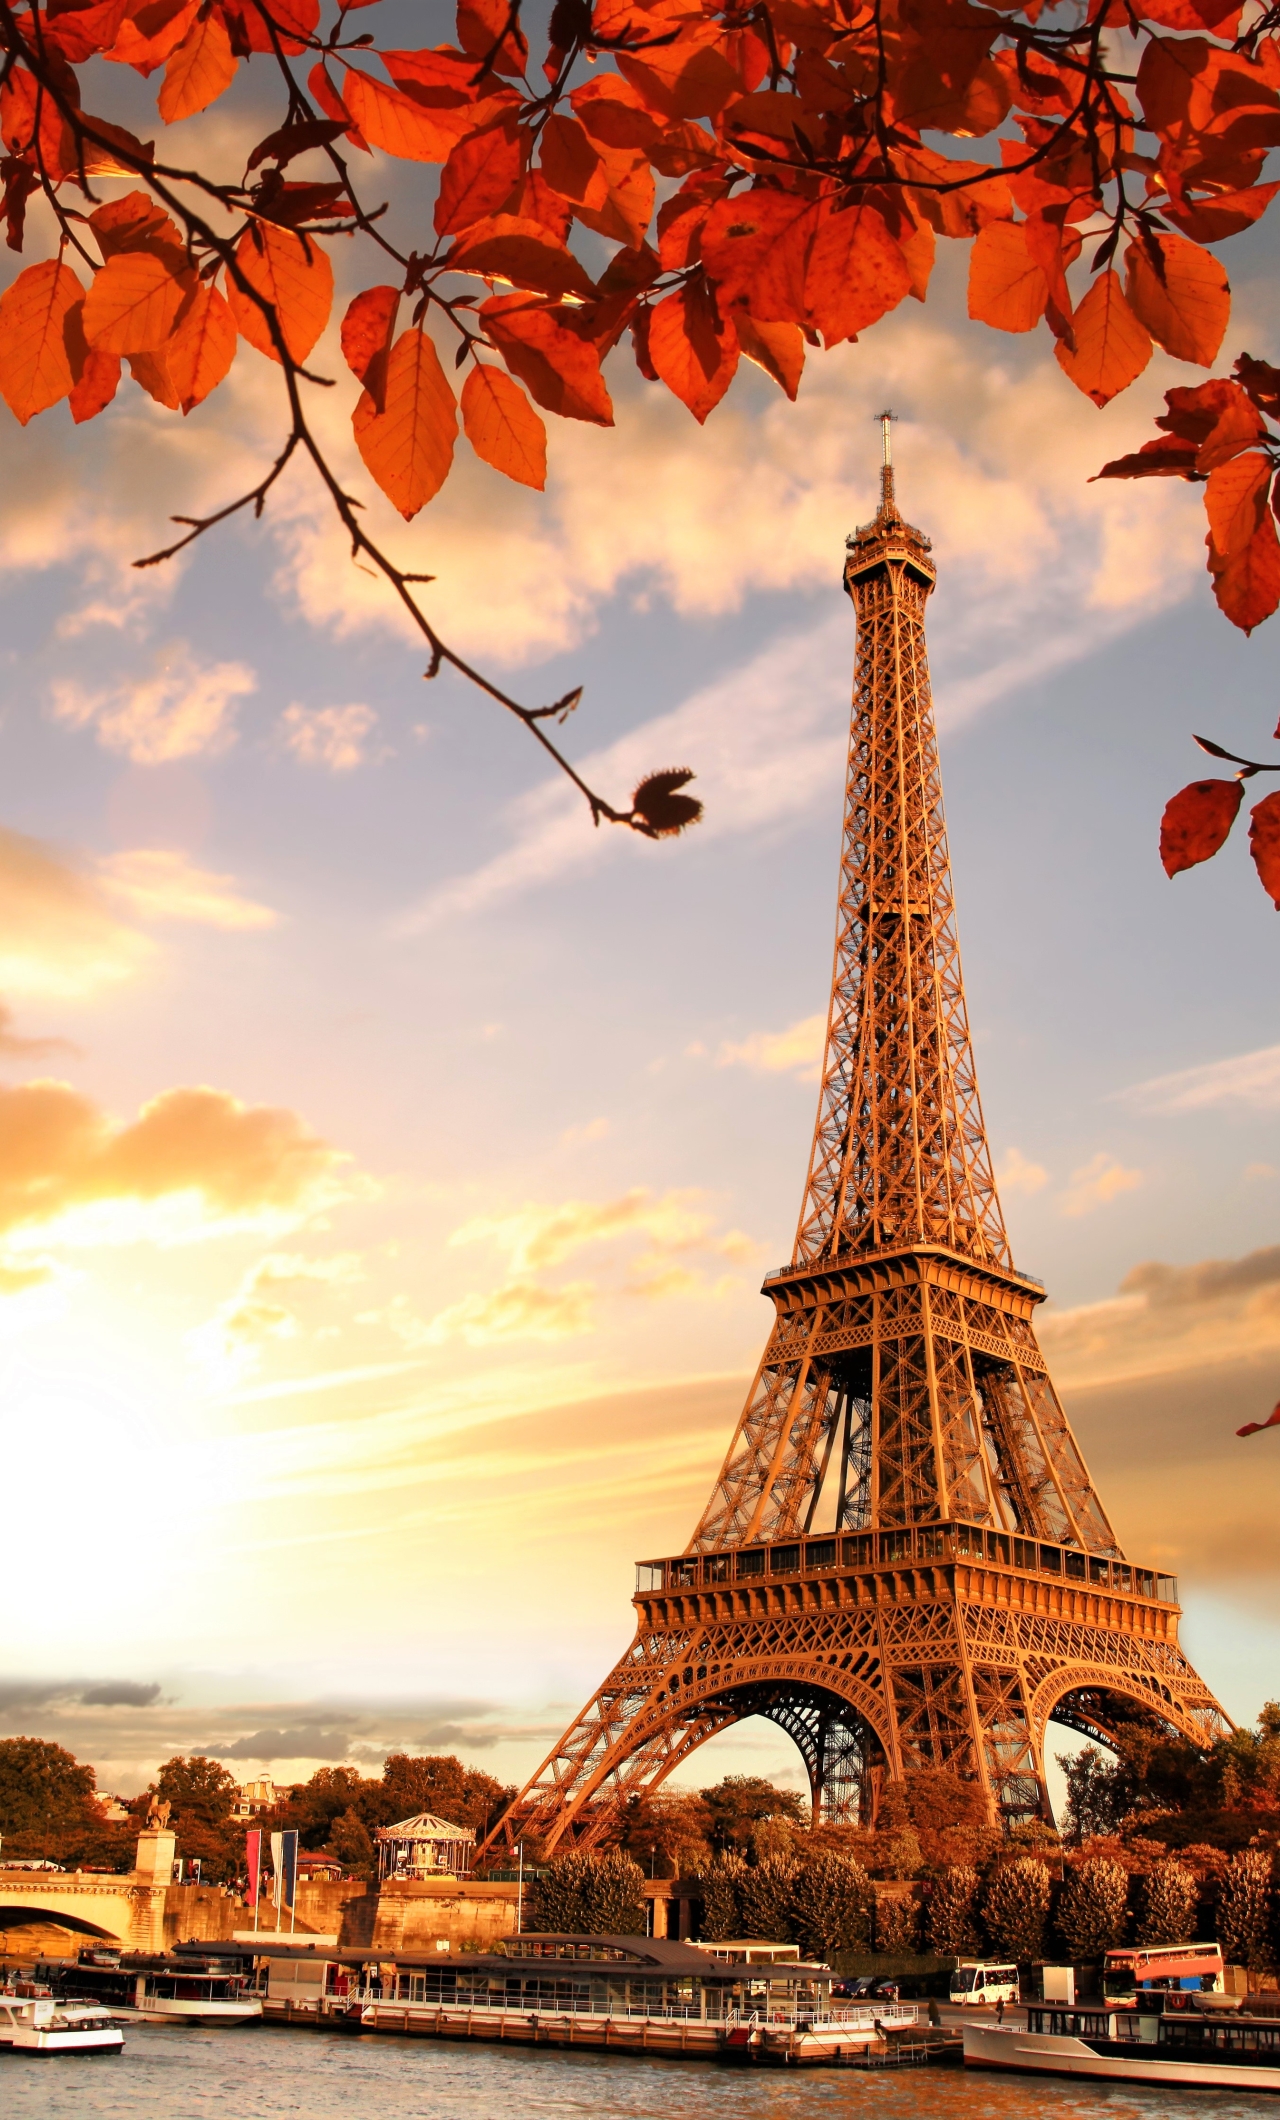 1280x2120 Eiffel Tower In Autumn France Paris Fall Iphone 6 Plus Wallpaper Hd City 4k Wallpapers Images Photos And Background